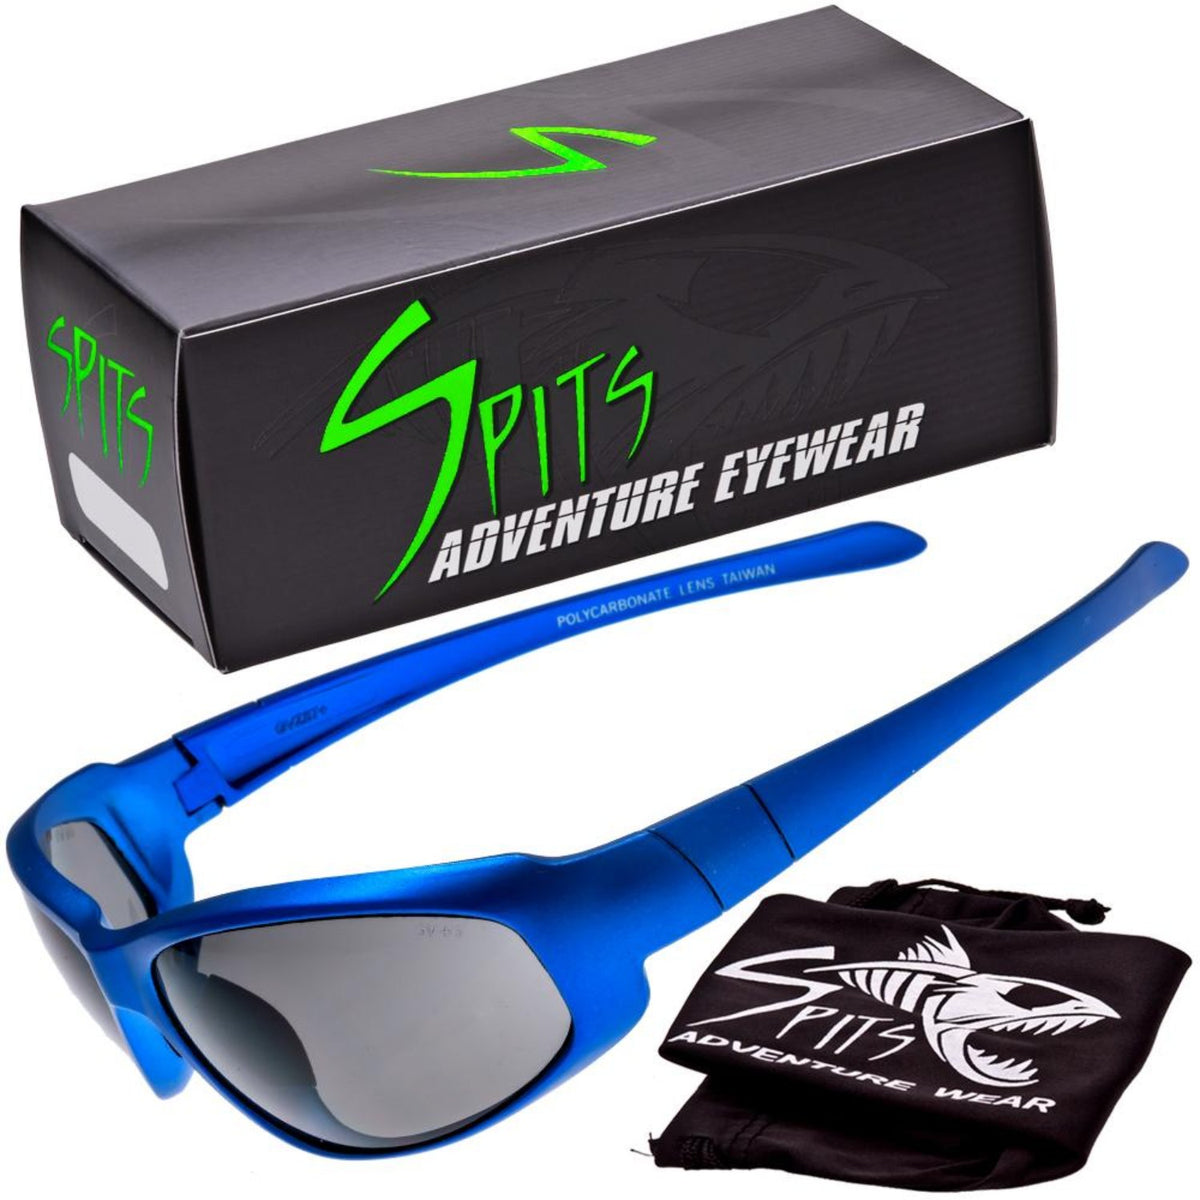 Sniper Blue -  Safety Rated Sunglasses Various Lens Colors, Photochromic and Foam Padding Options